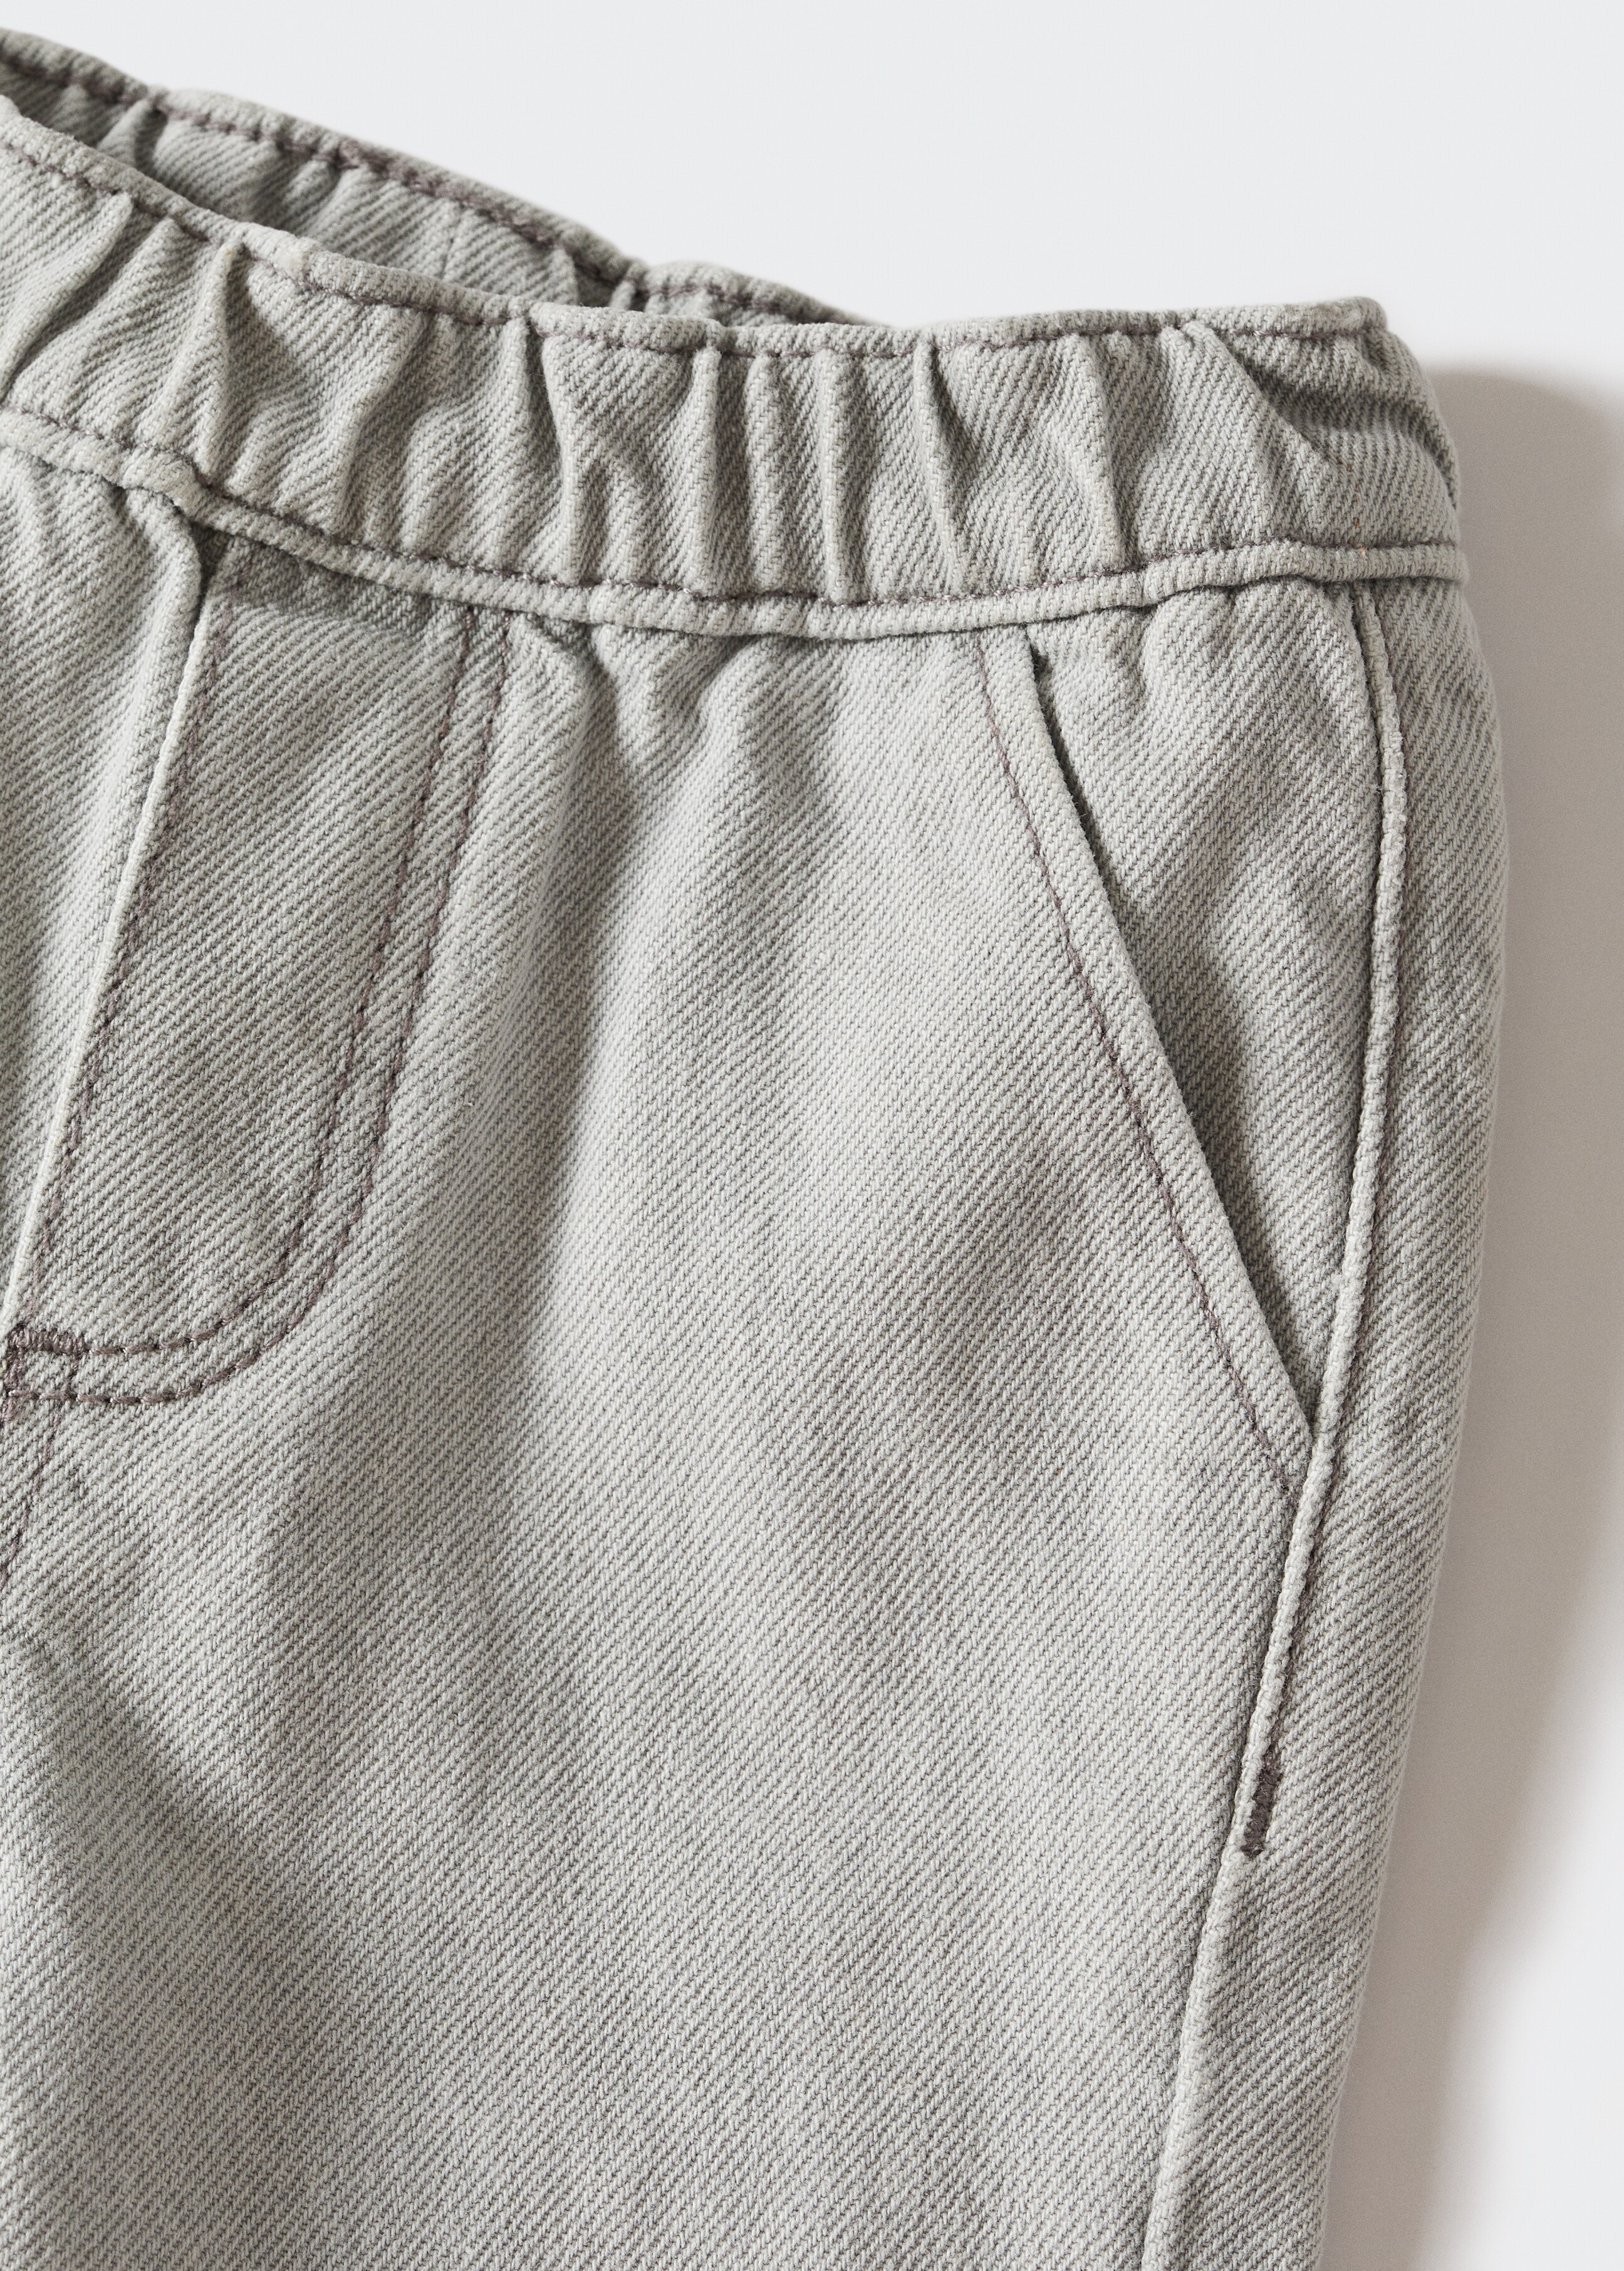 Drawstring waist jeans - Details of the article 9